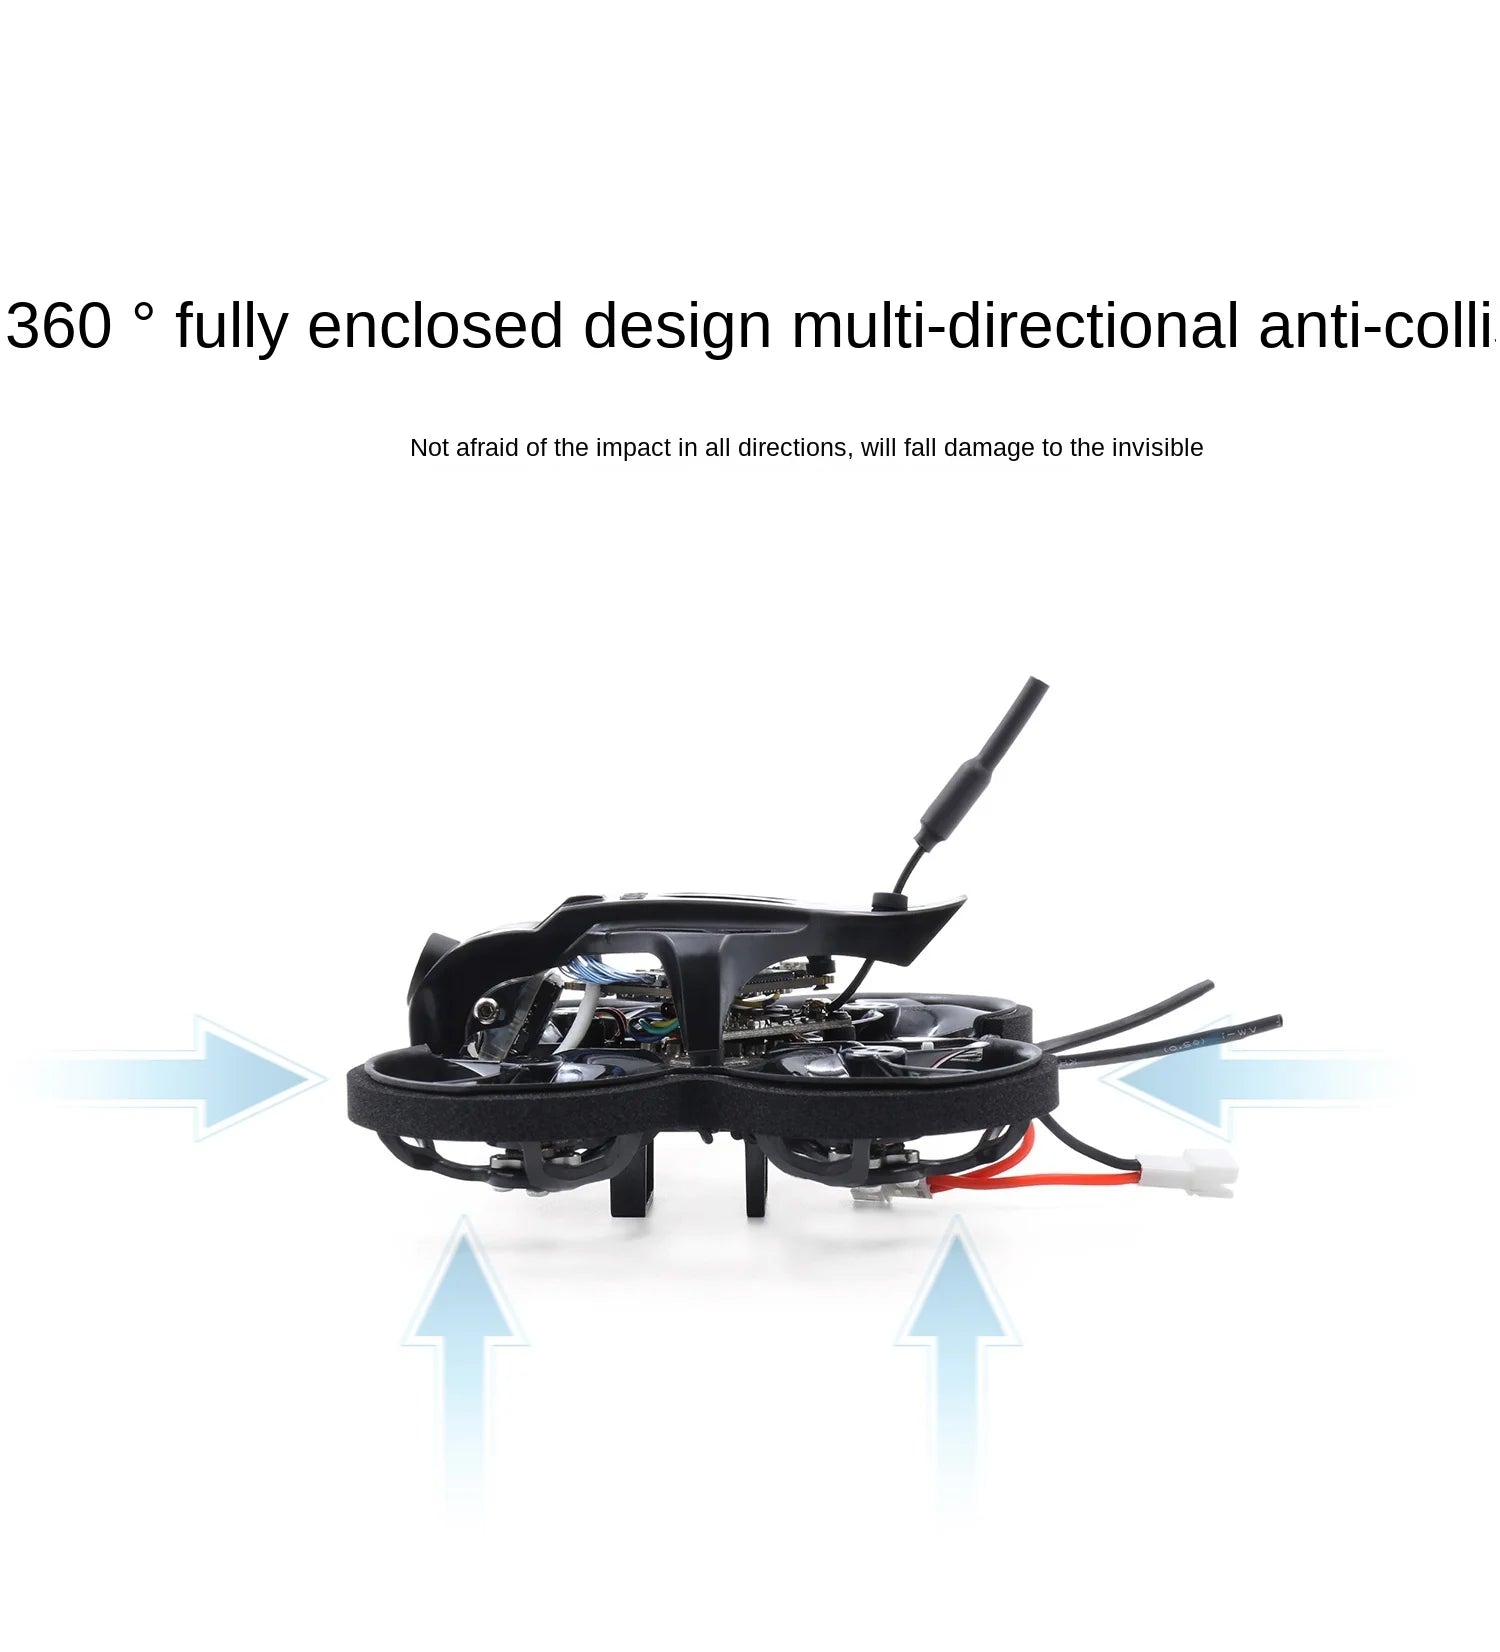 GEPRC TinyGO 4K FPV, 360 fully enclosed design multi-directional anti-colli Not afraid of the impact in all directions